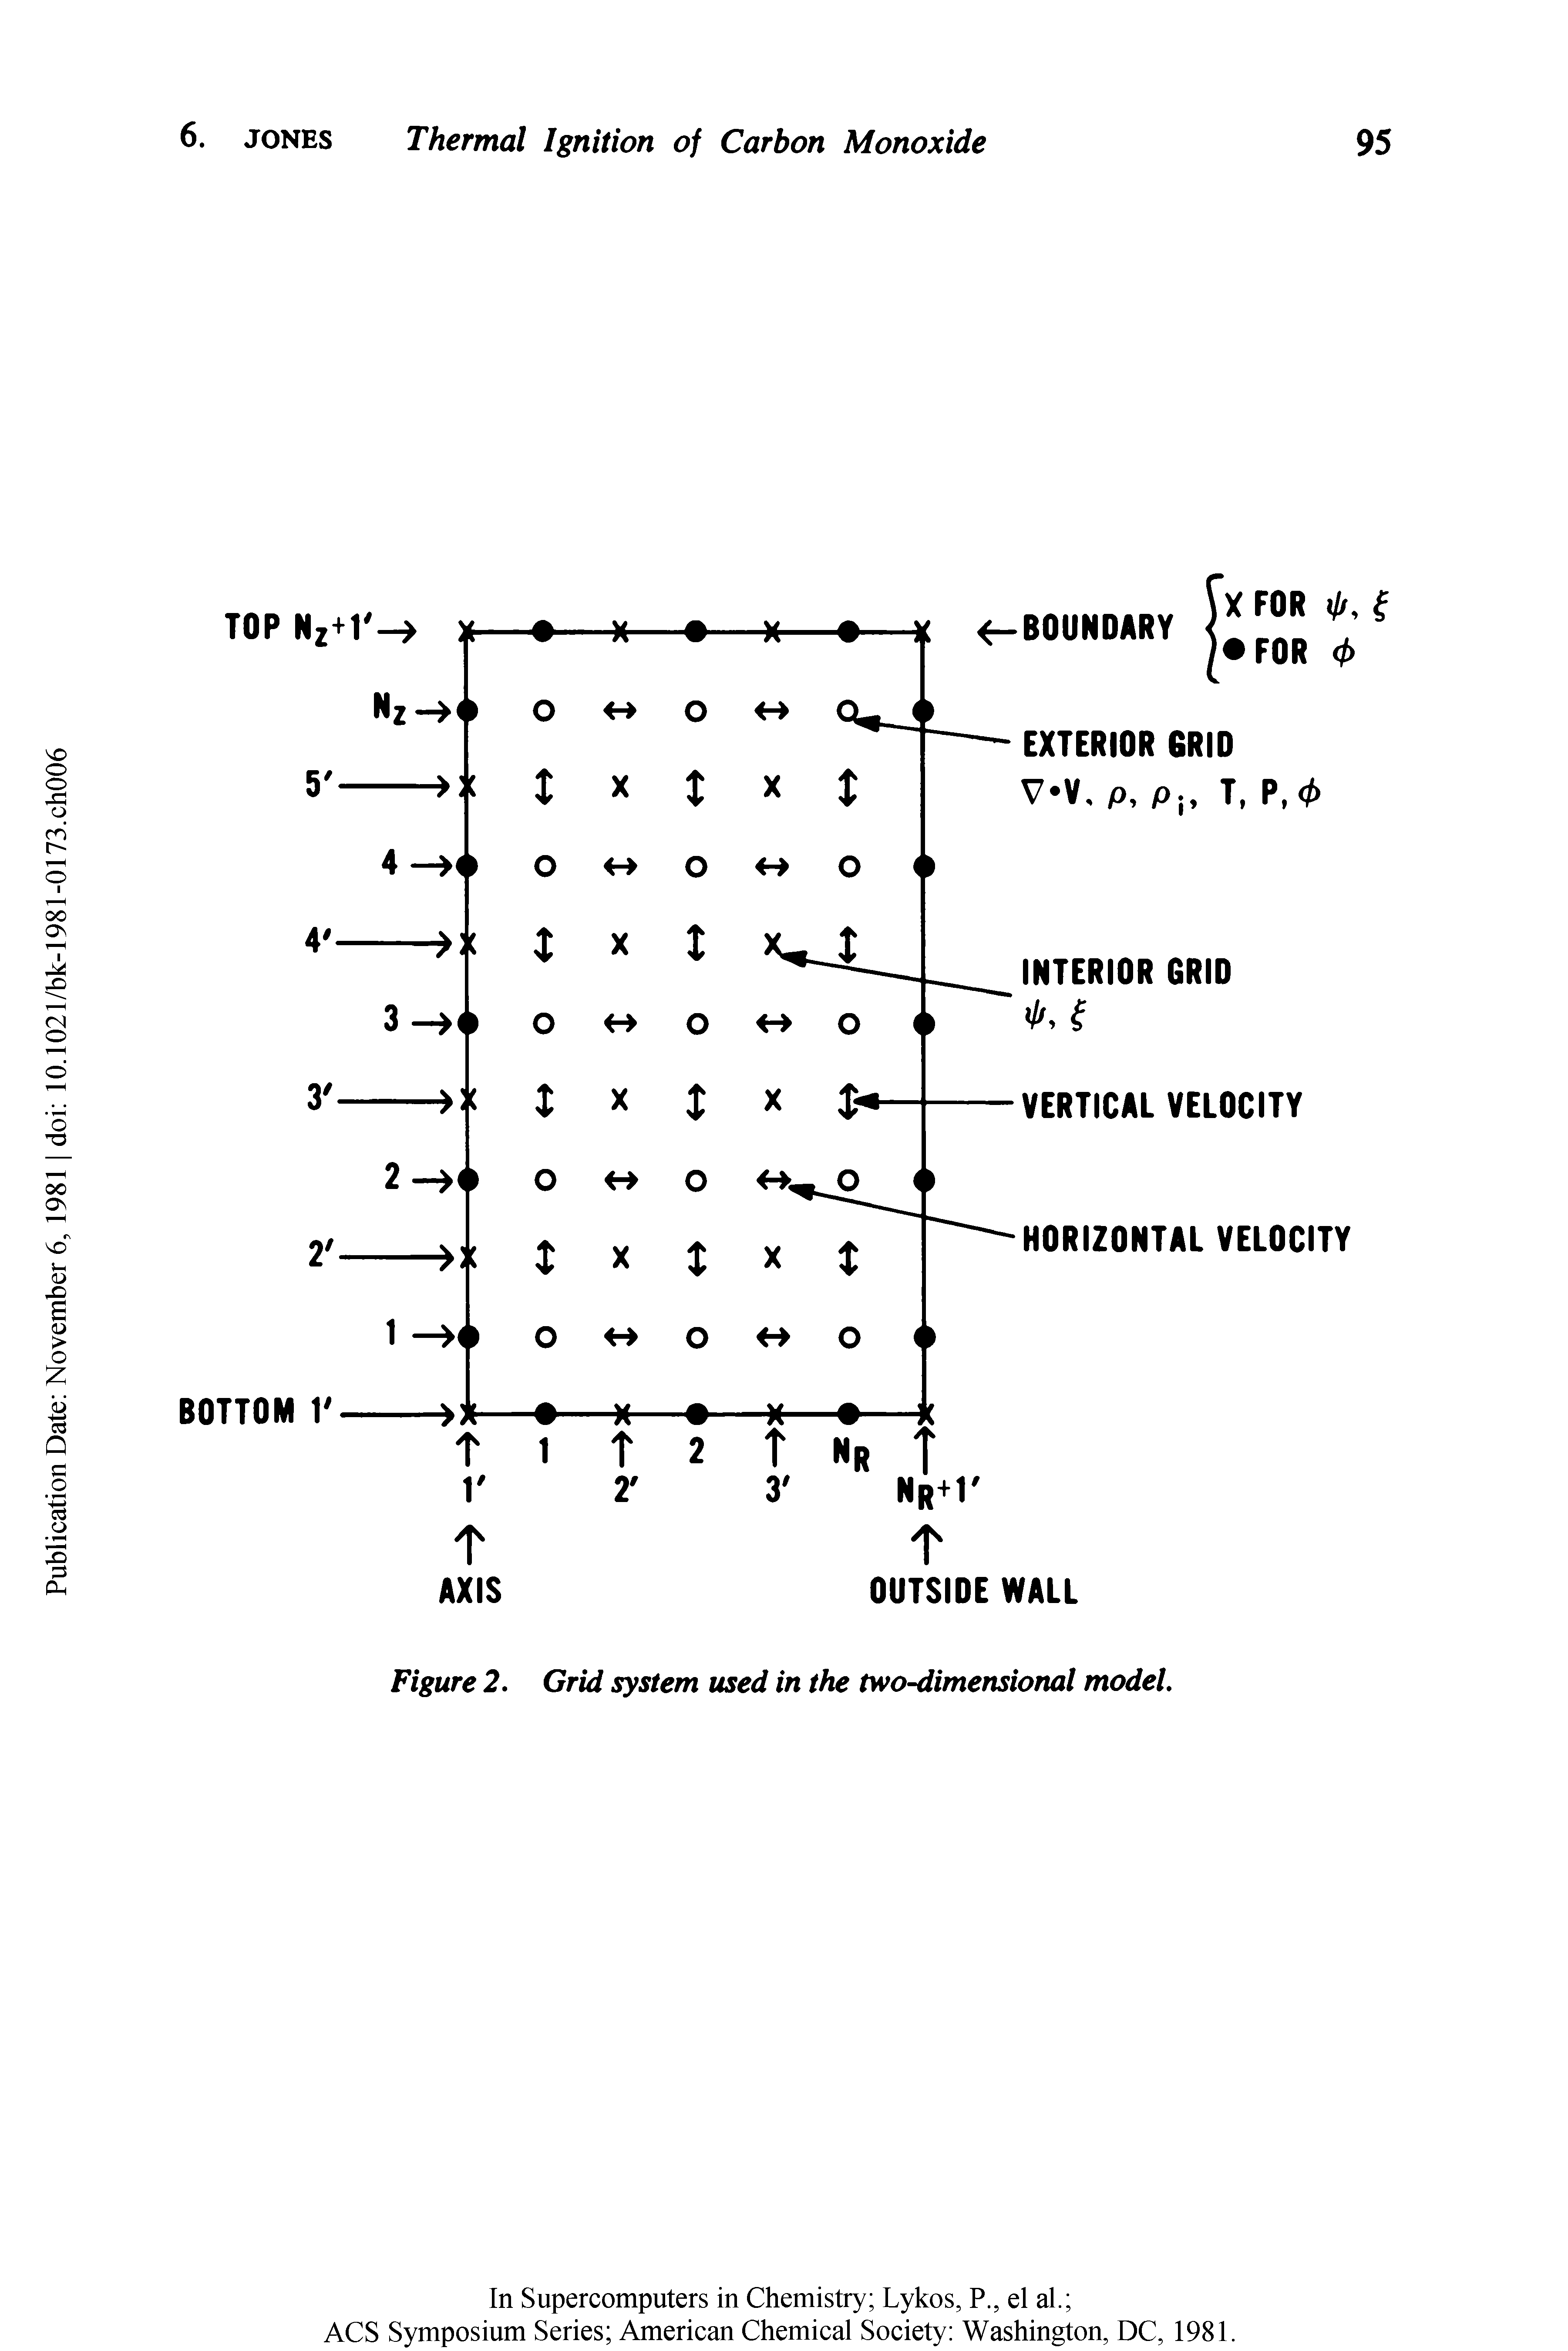 Figure 2. Grid system used in the two-dimensional model.